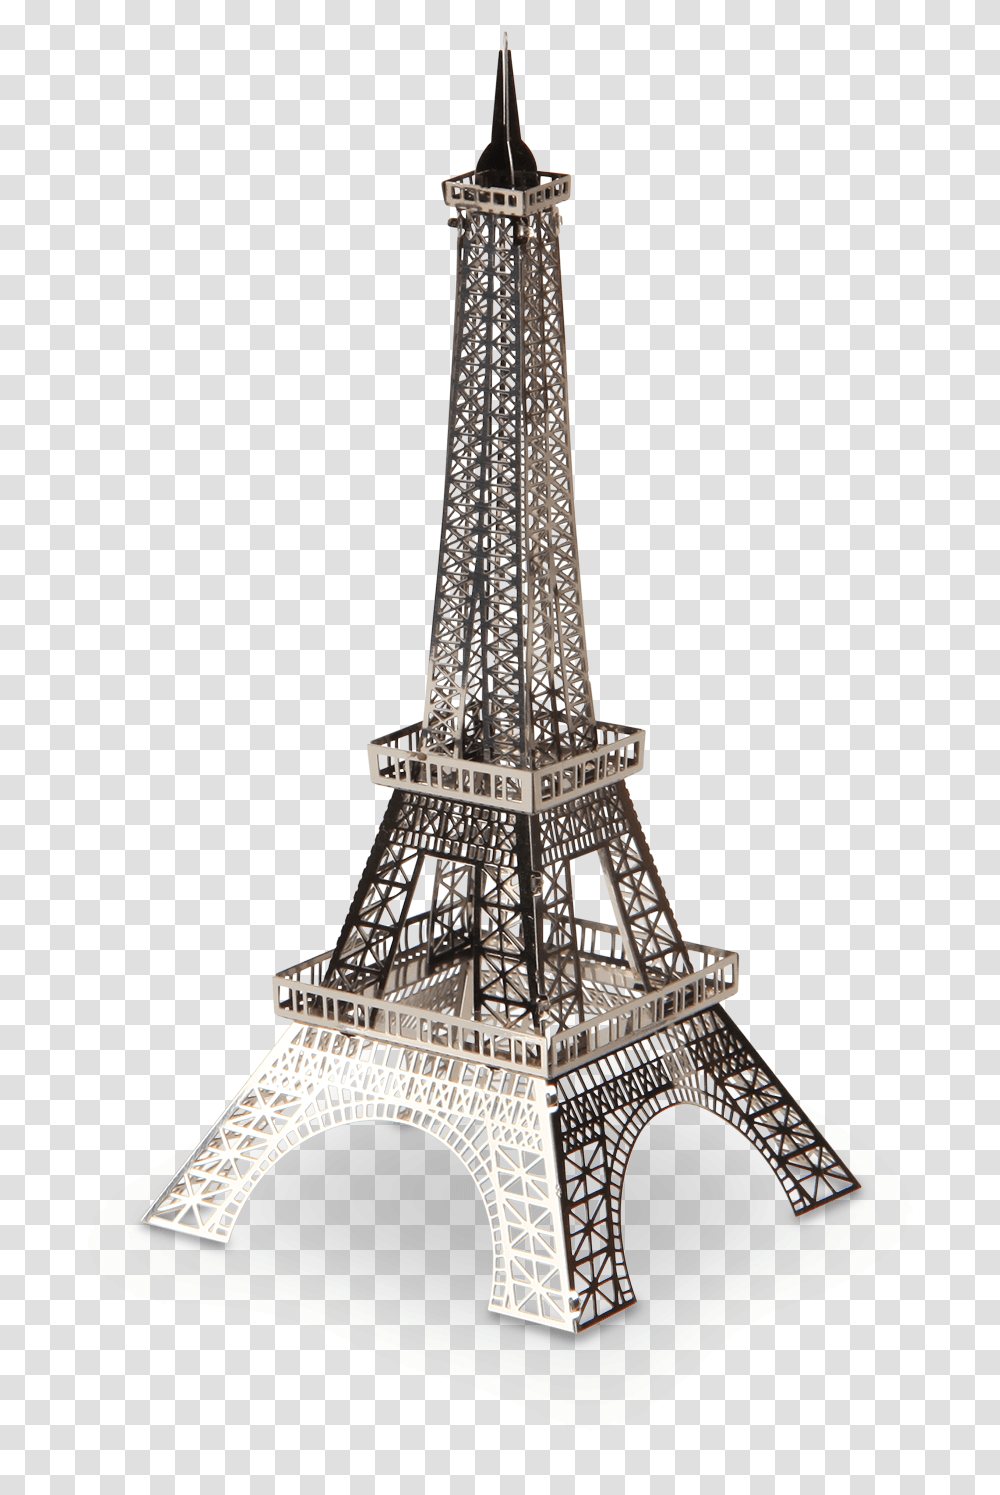 Metal Earth Eiffel Tower Eiffel Tower Graph 3d, Architecture, Building, Spire, Steeple Transparent Png